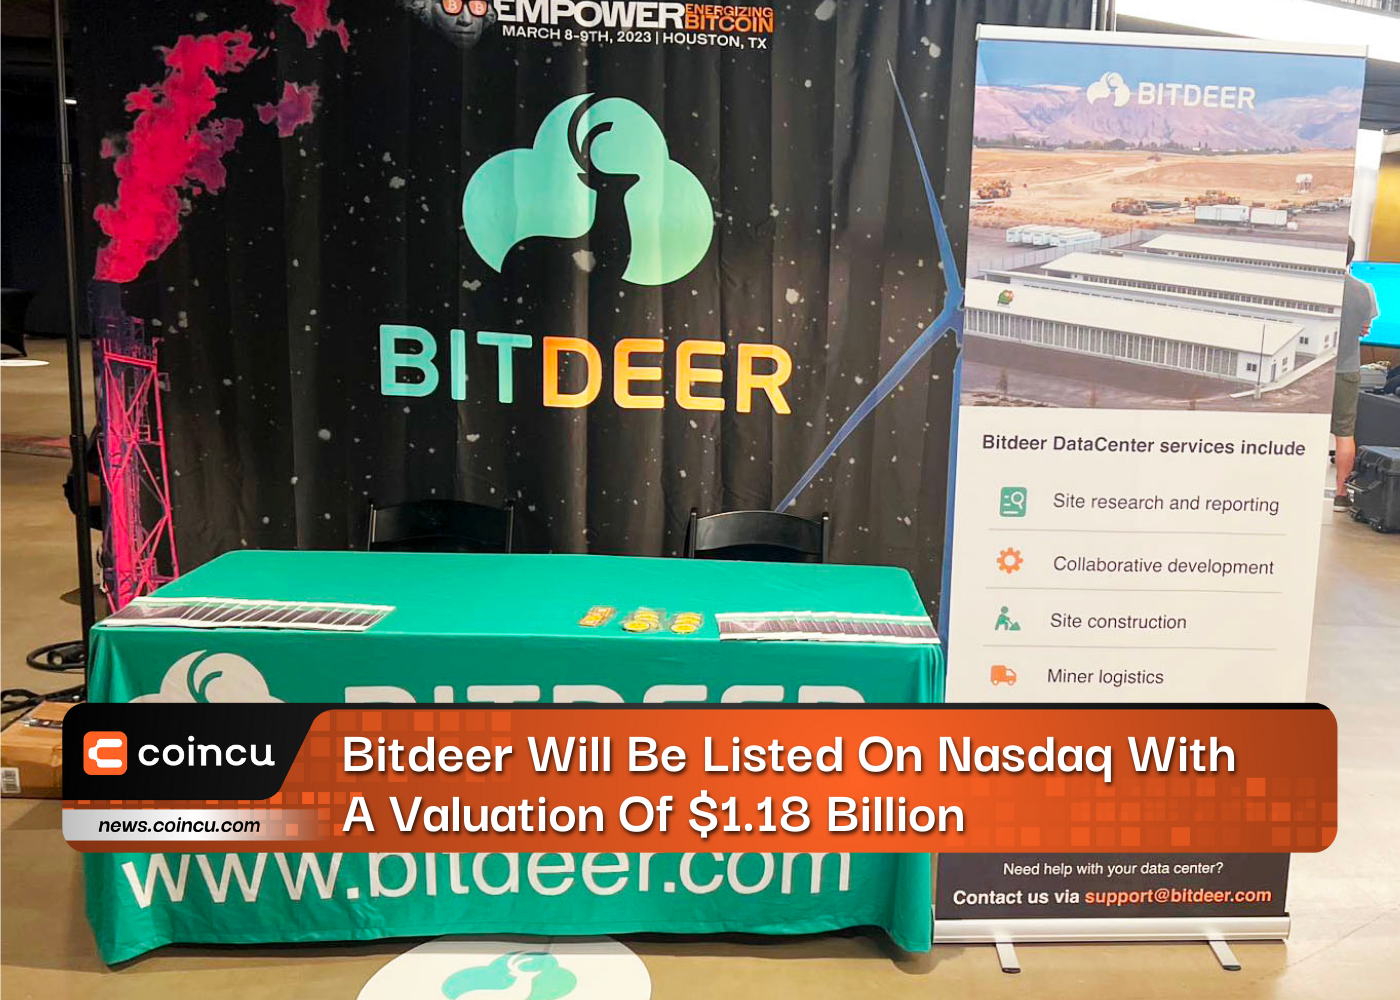 Bitdeer Will Be Listed On Nasdaq With A Valuation Of $1.18 Billion